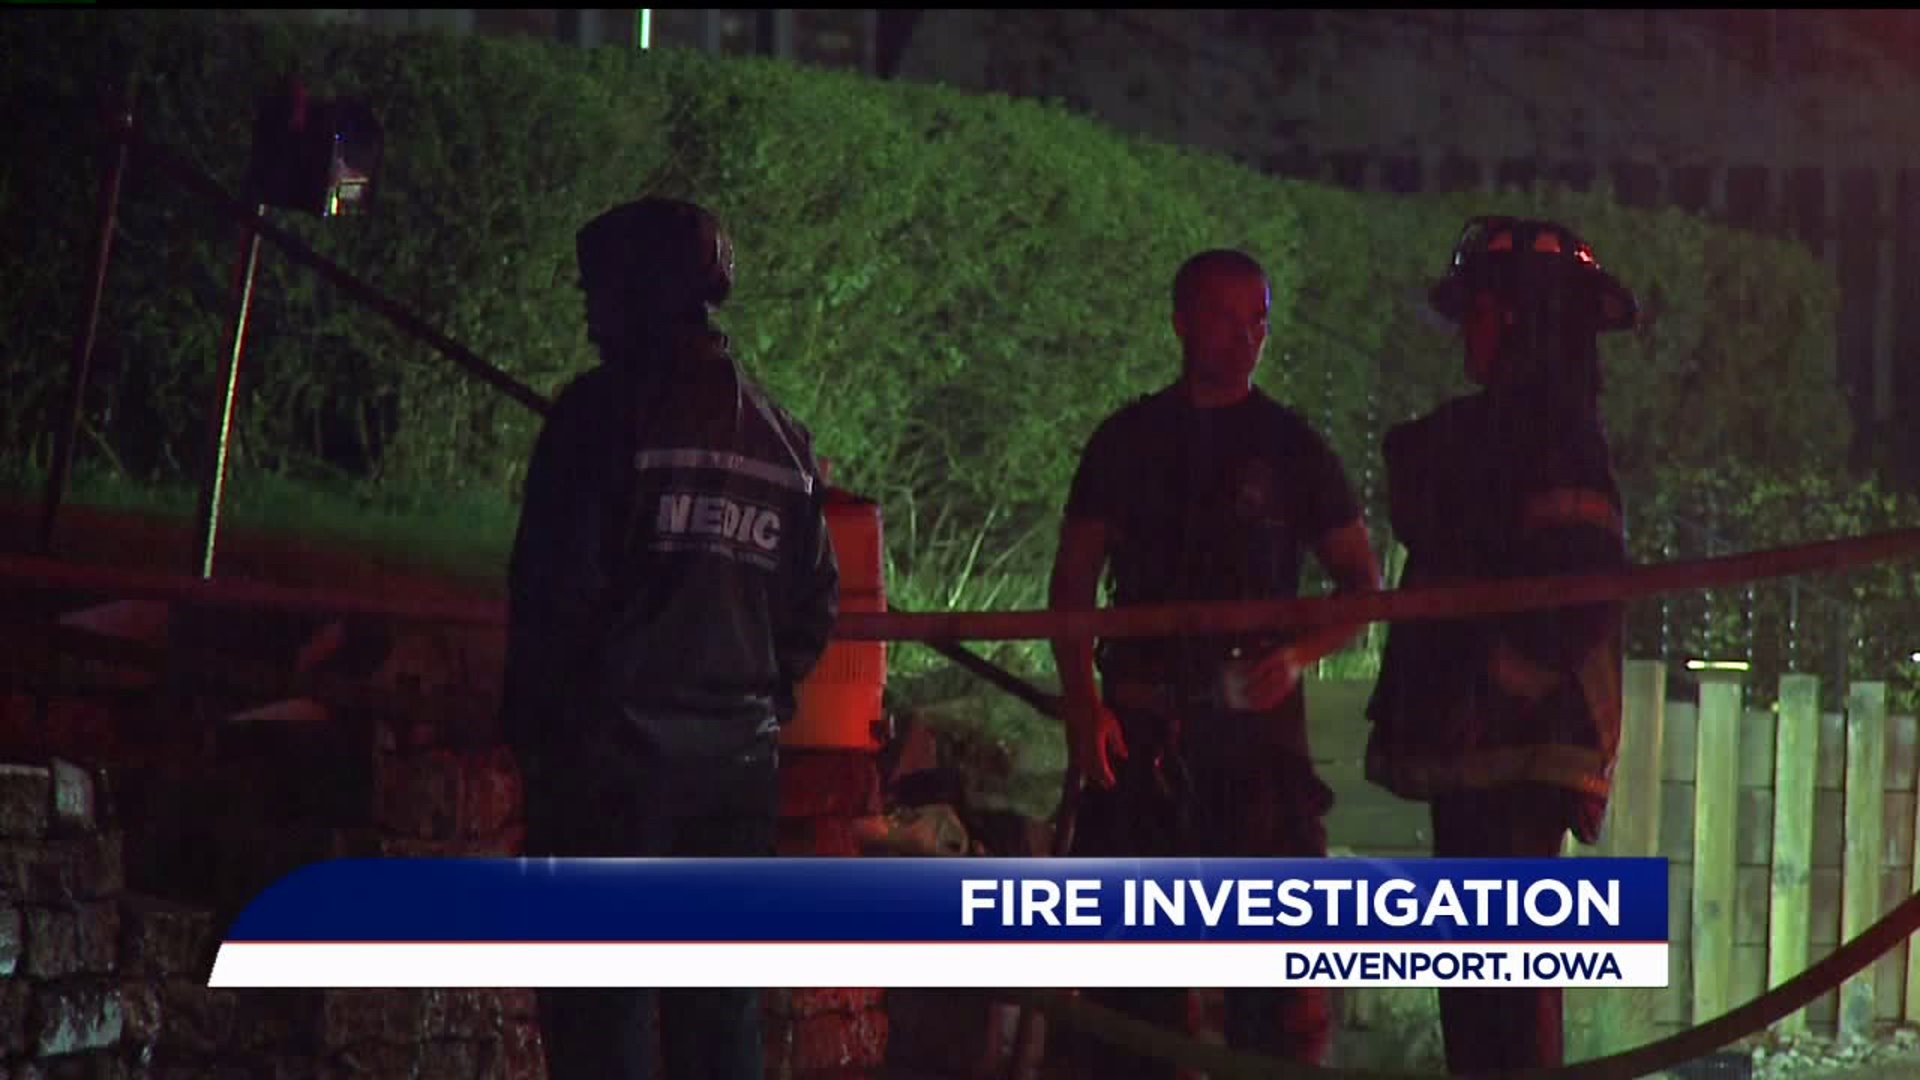 House fire in Davenport under investigation